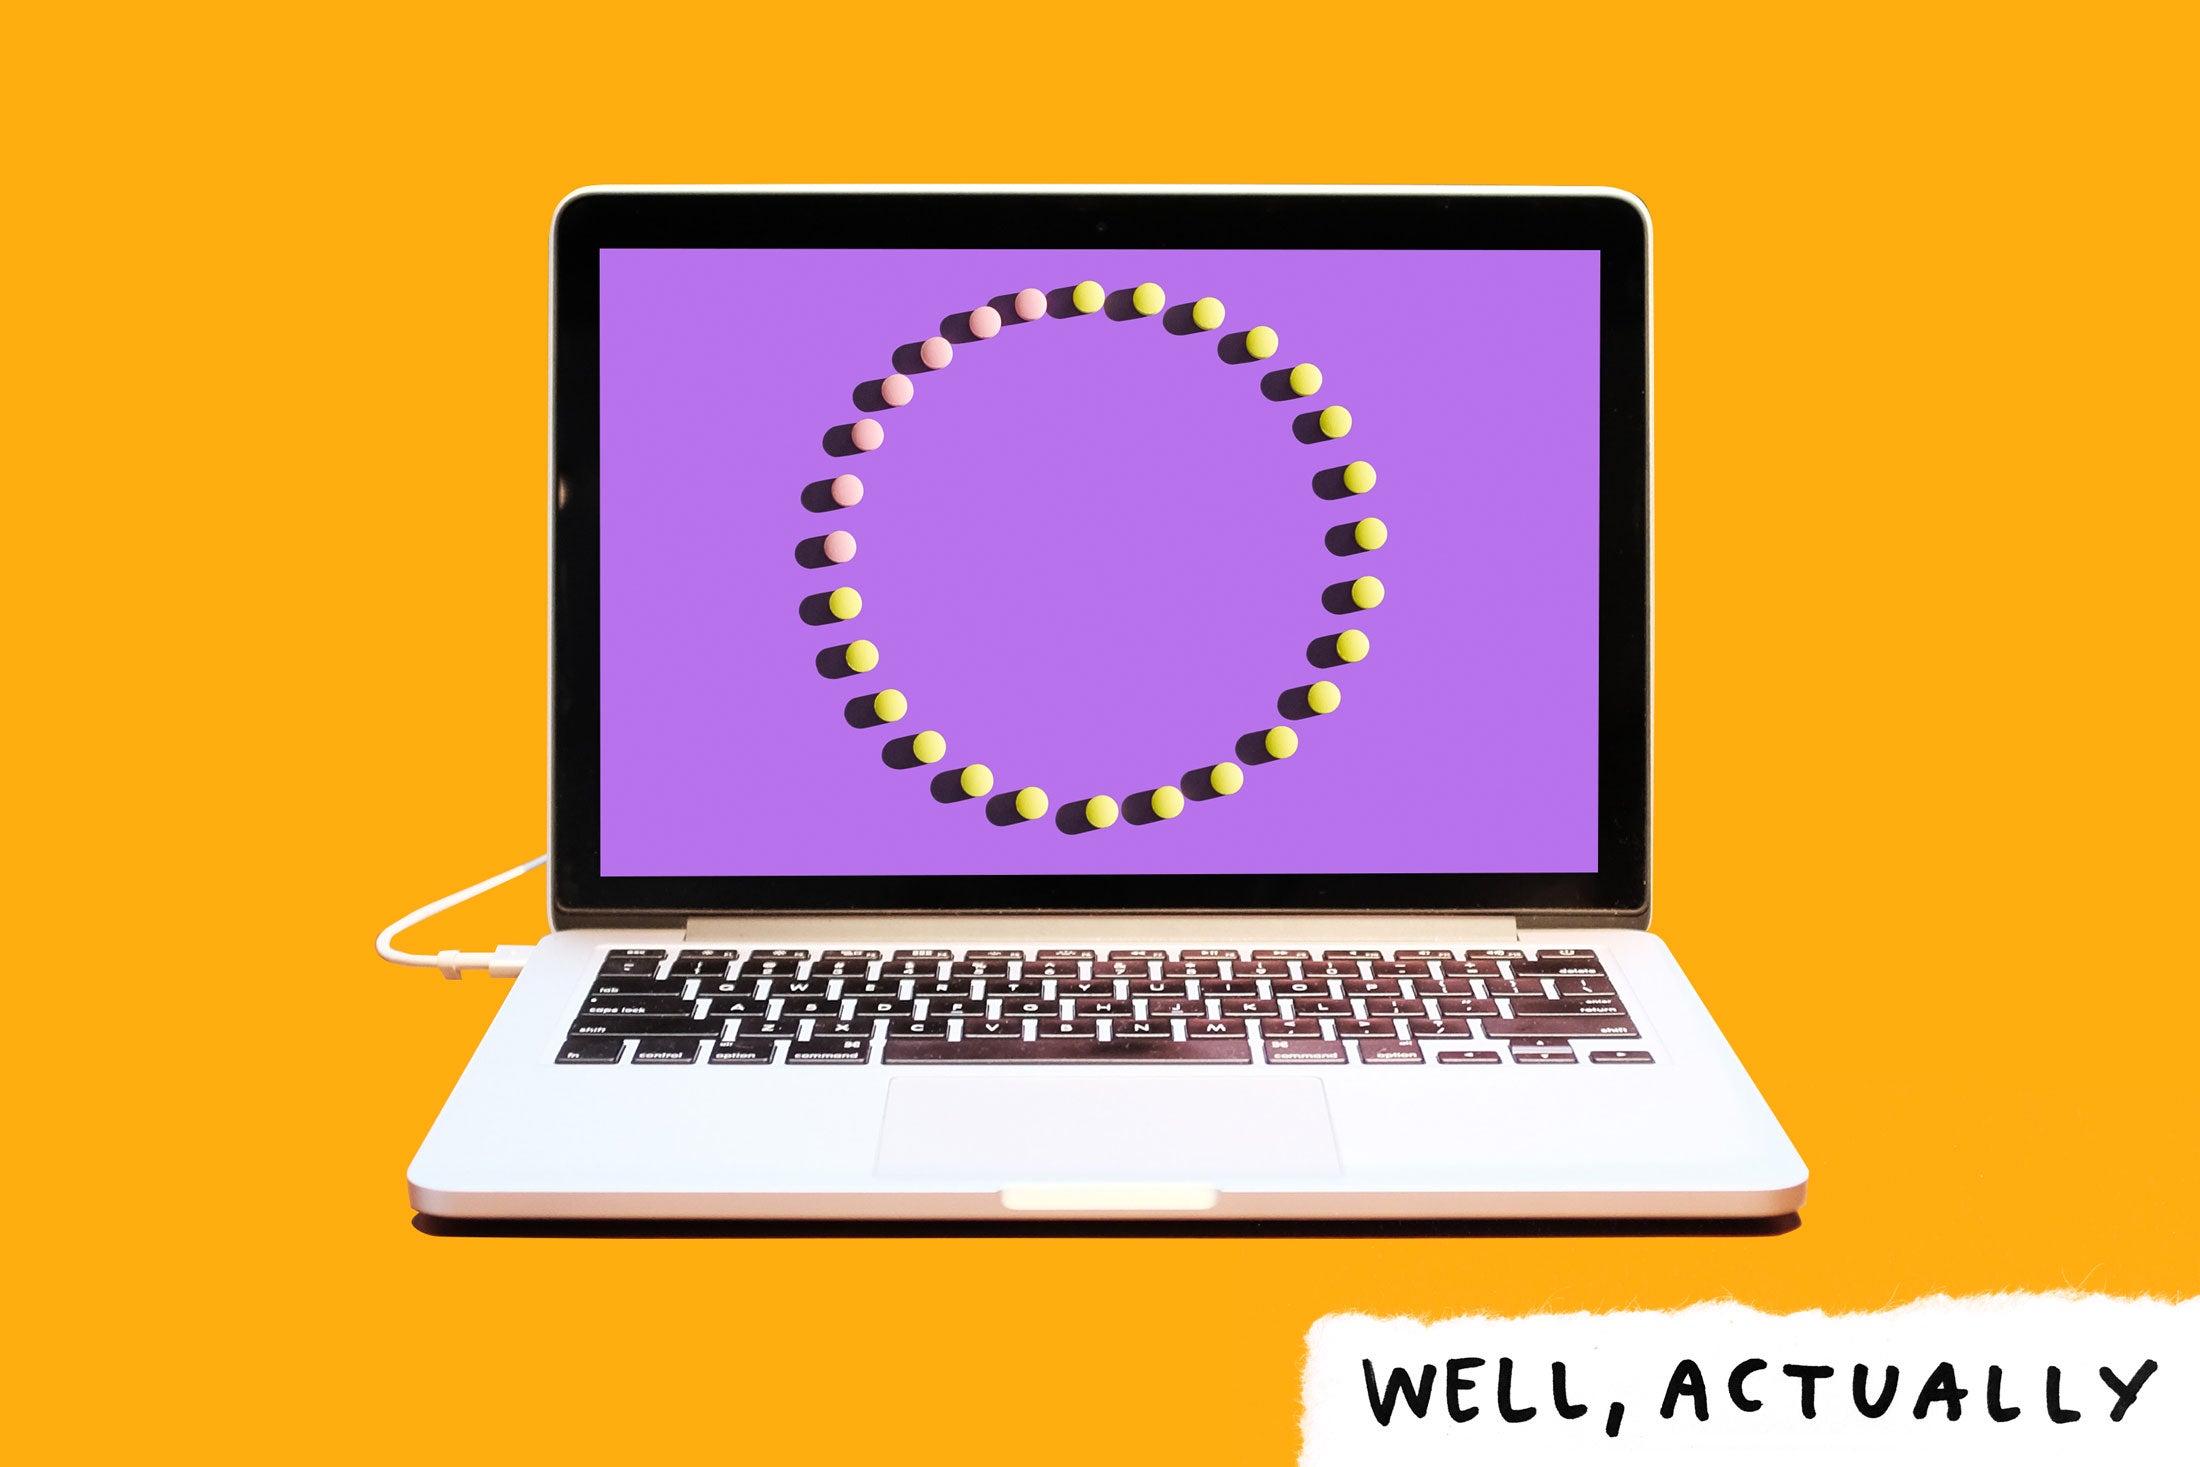 Laptop computer on a bright background, with photo of a full cycle of birth control pills on the screen.